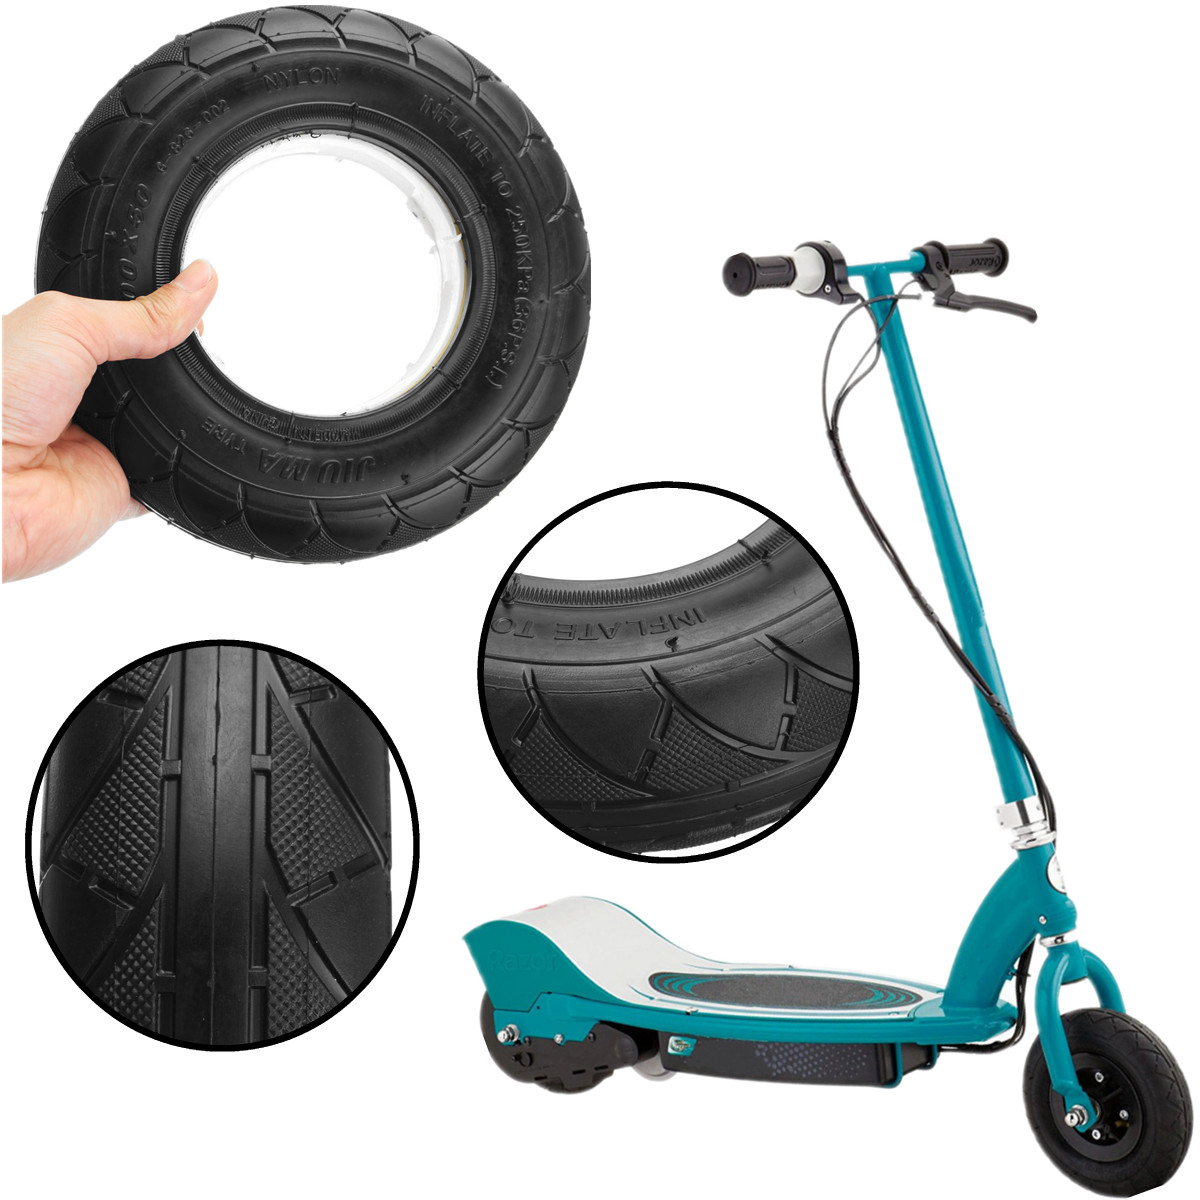 

BIKIGHT Electric Scooter Tire Cover Tyre Cross-country Tread Pattern For Razor 200x50(8" x 2")